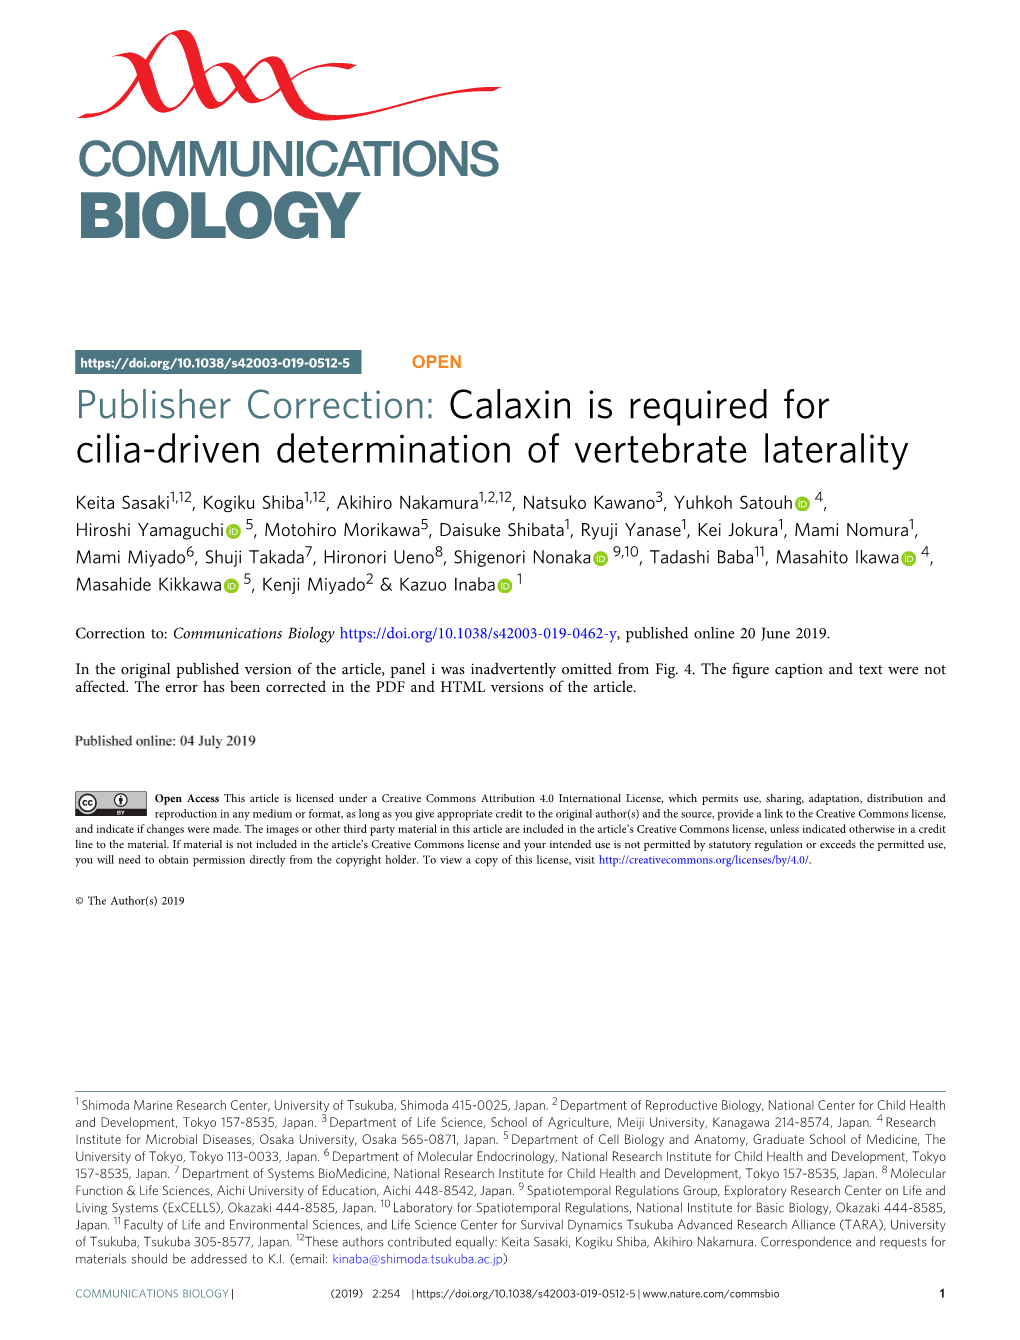 Publisher Correction: Calaxin Is Required for Cilia-Driven Determination of Vertebrate Laterality